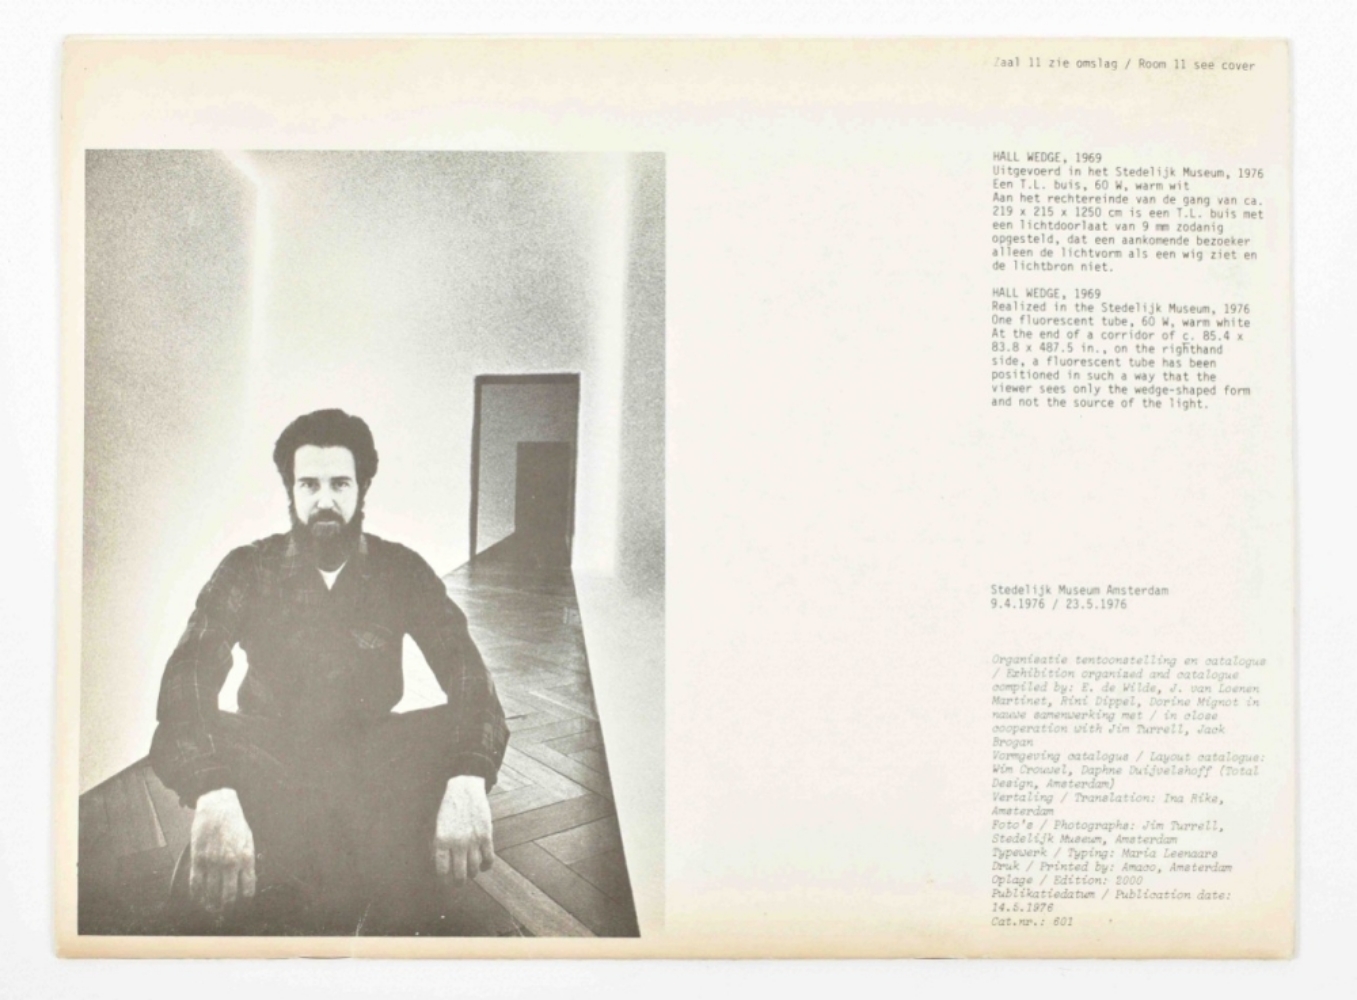 Stedelijk Museum catalogues: Acconci, Barry, Ruppersberg, Turrell - Image 4 of 8